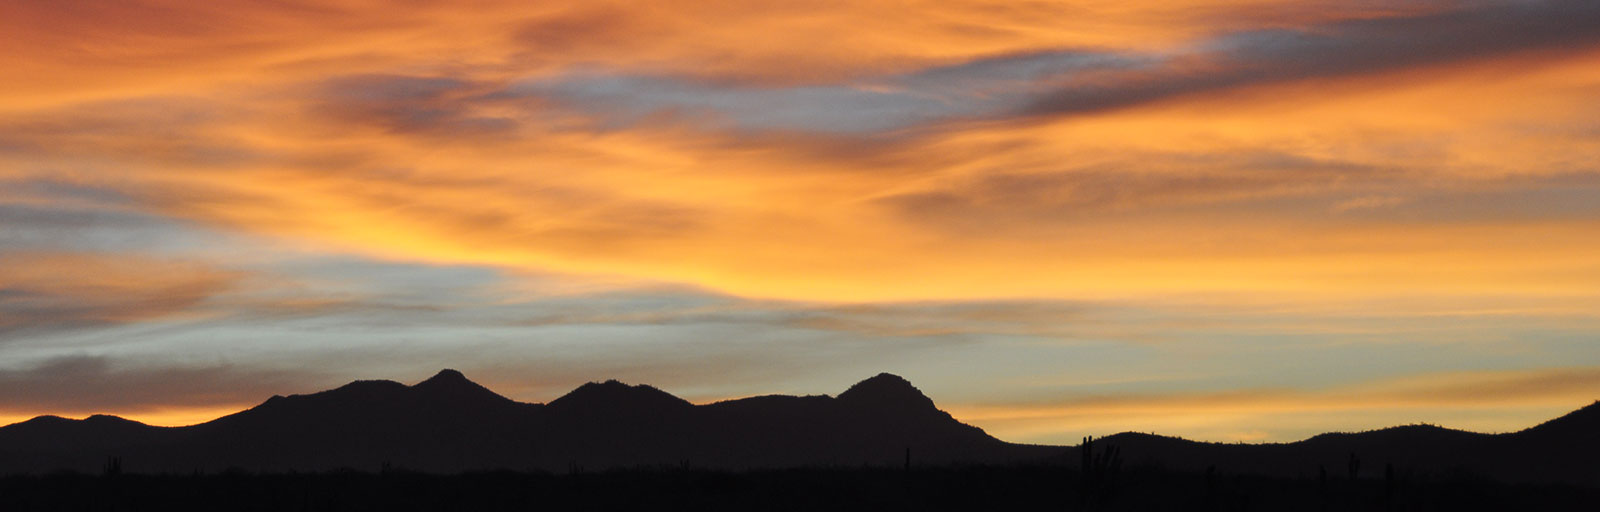 Hiking & Yoga Retreat in Mexico: Sunset and Mountain Silhouette